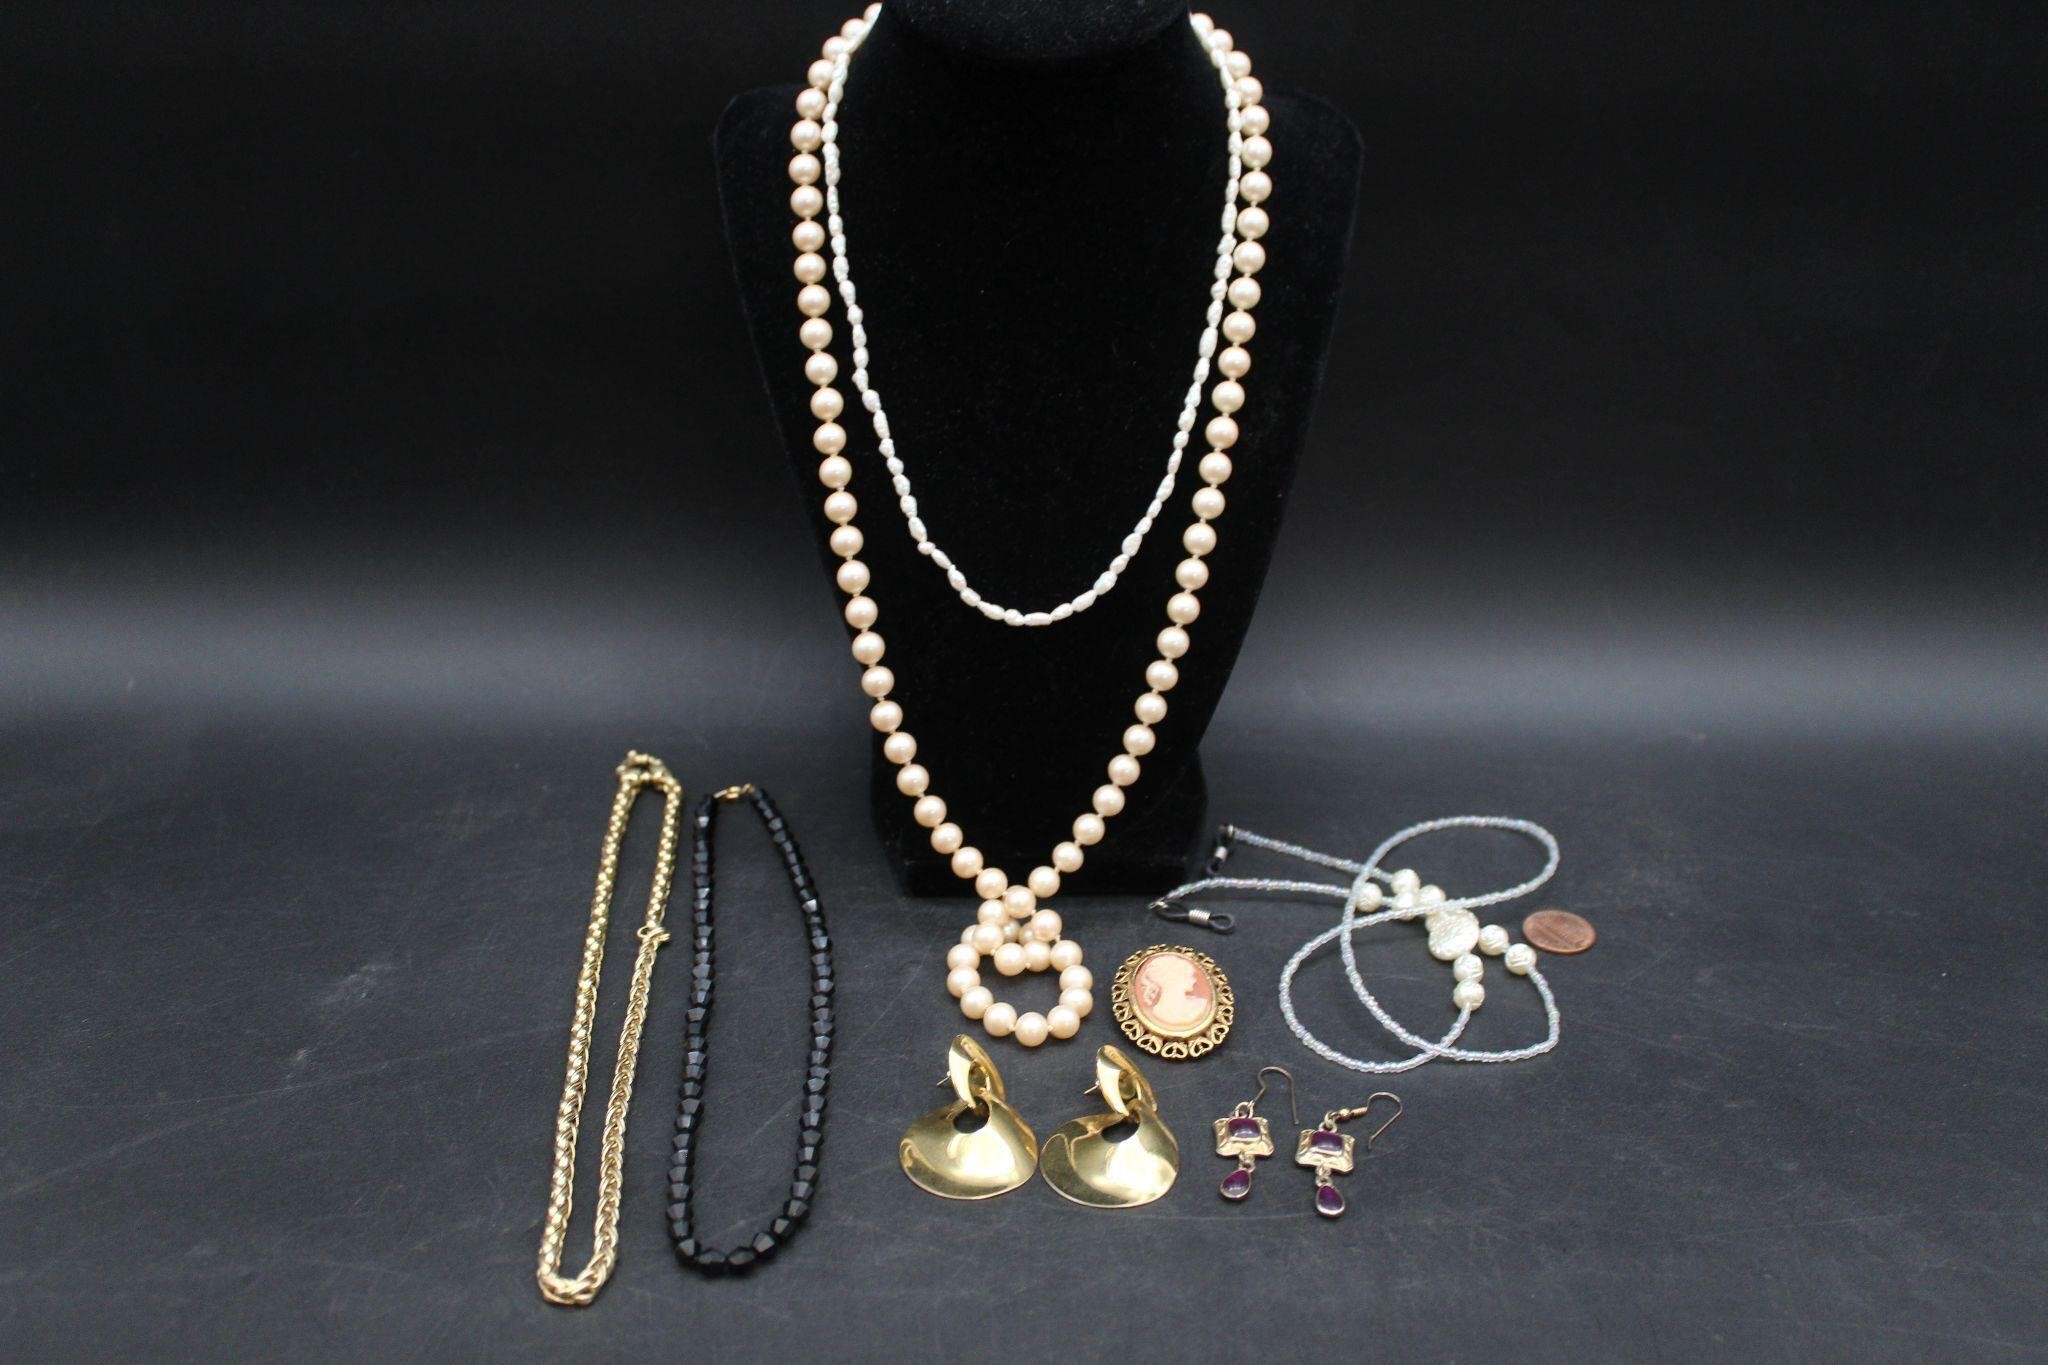 10 Pcs. French Jet, Cameo, Pearls Costume+++